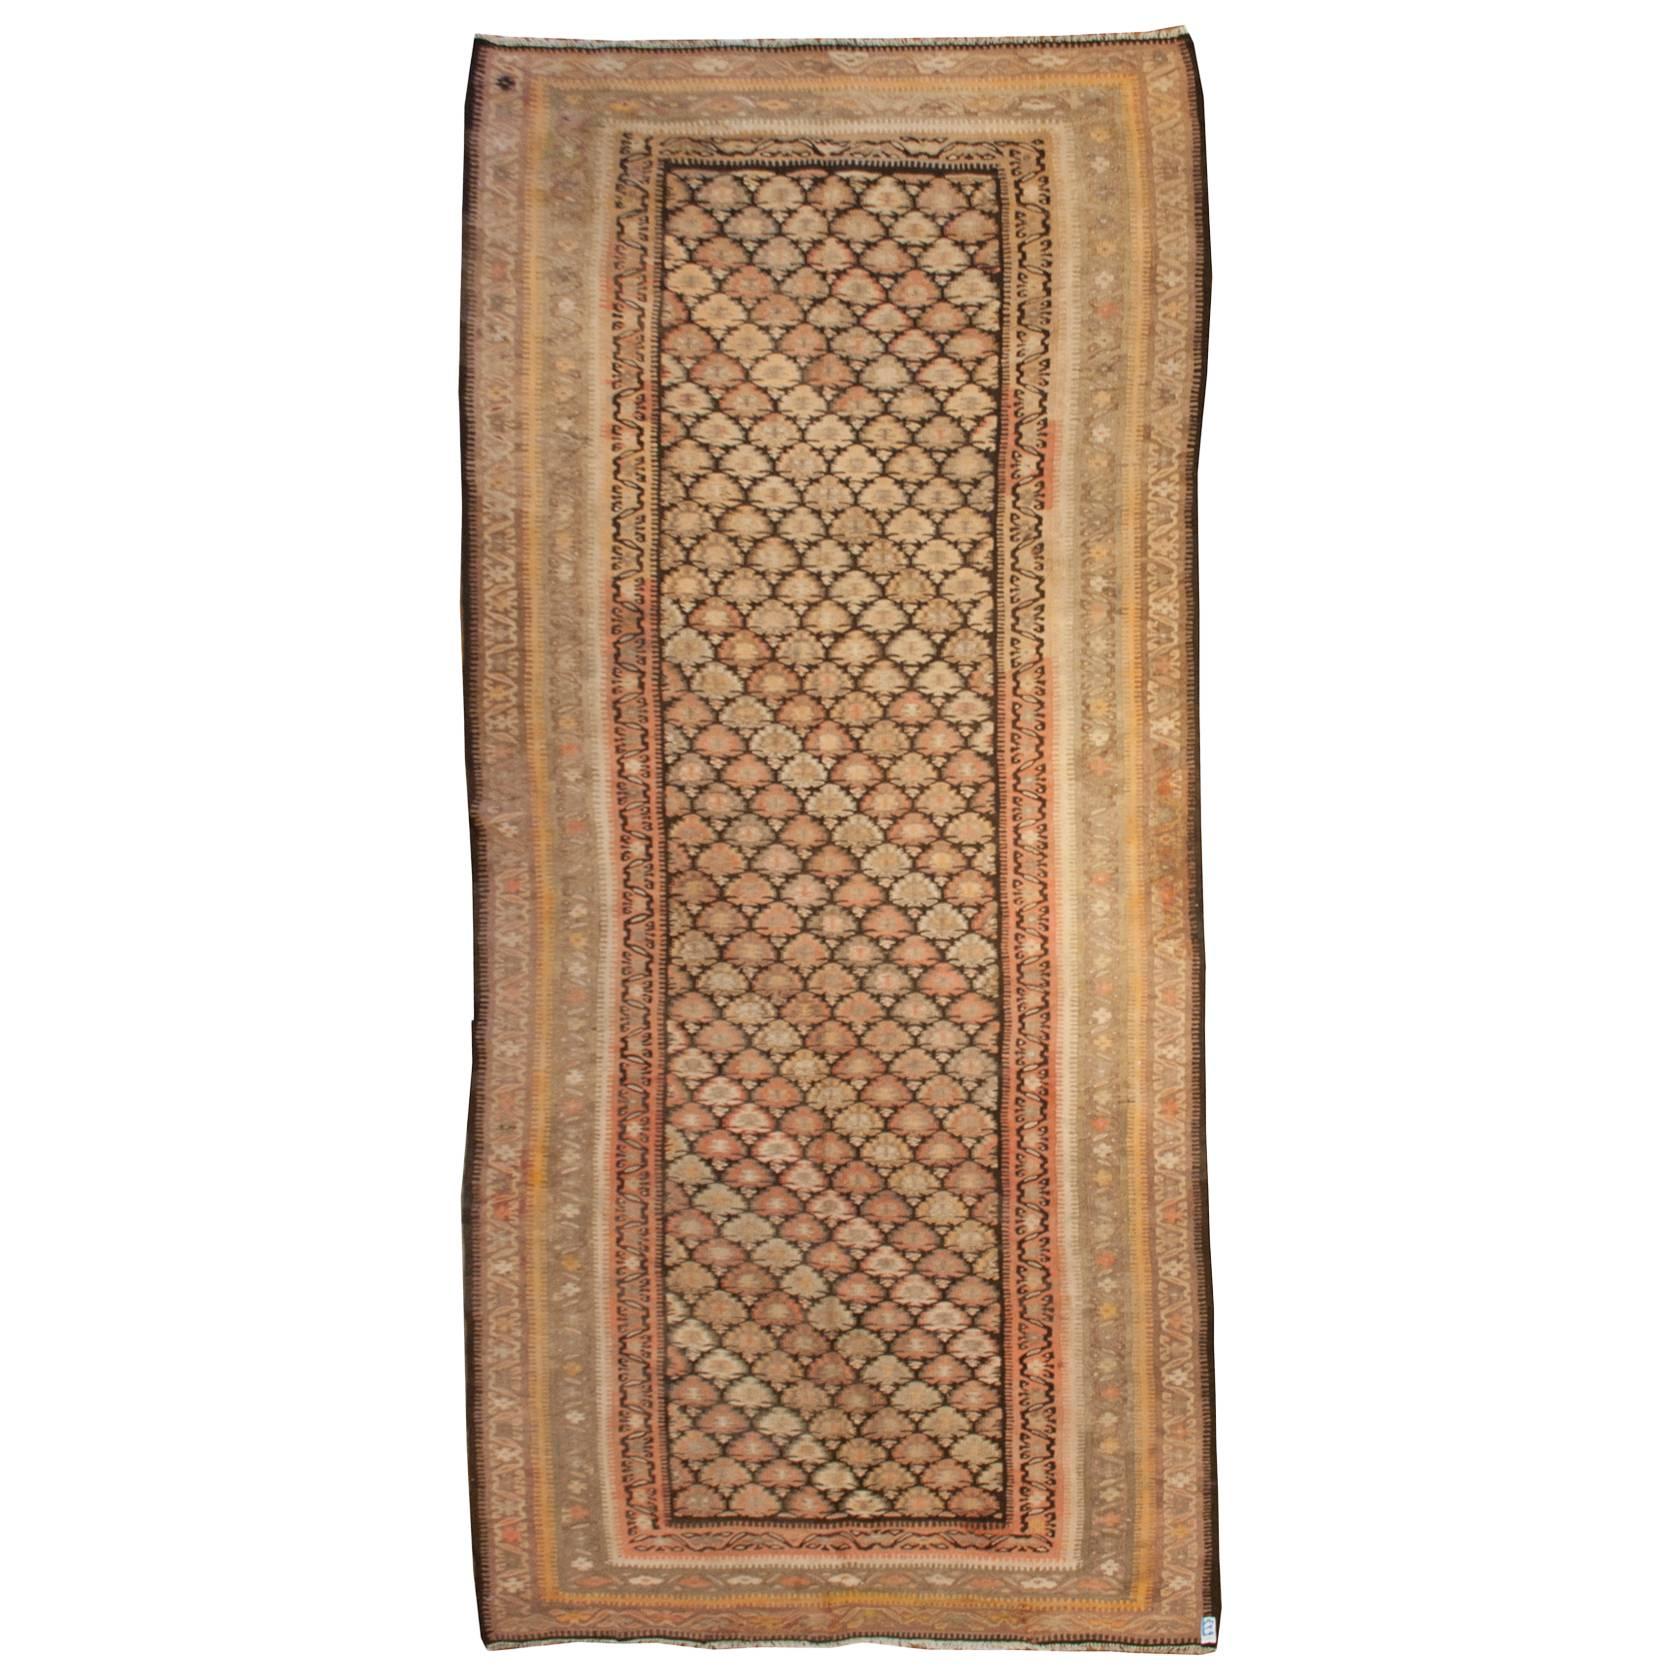 Exceptional Early 20th Century Qazvin Kilim Runner